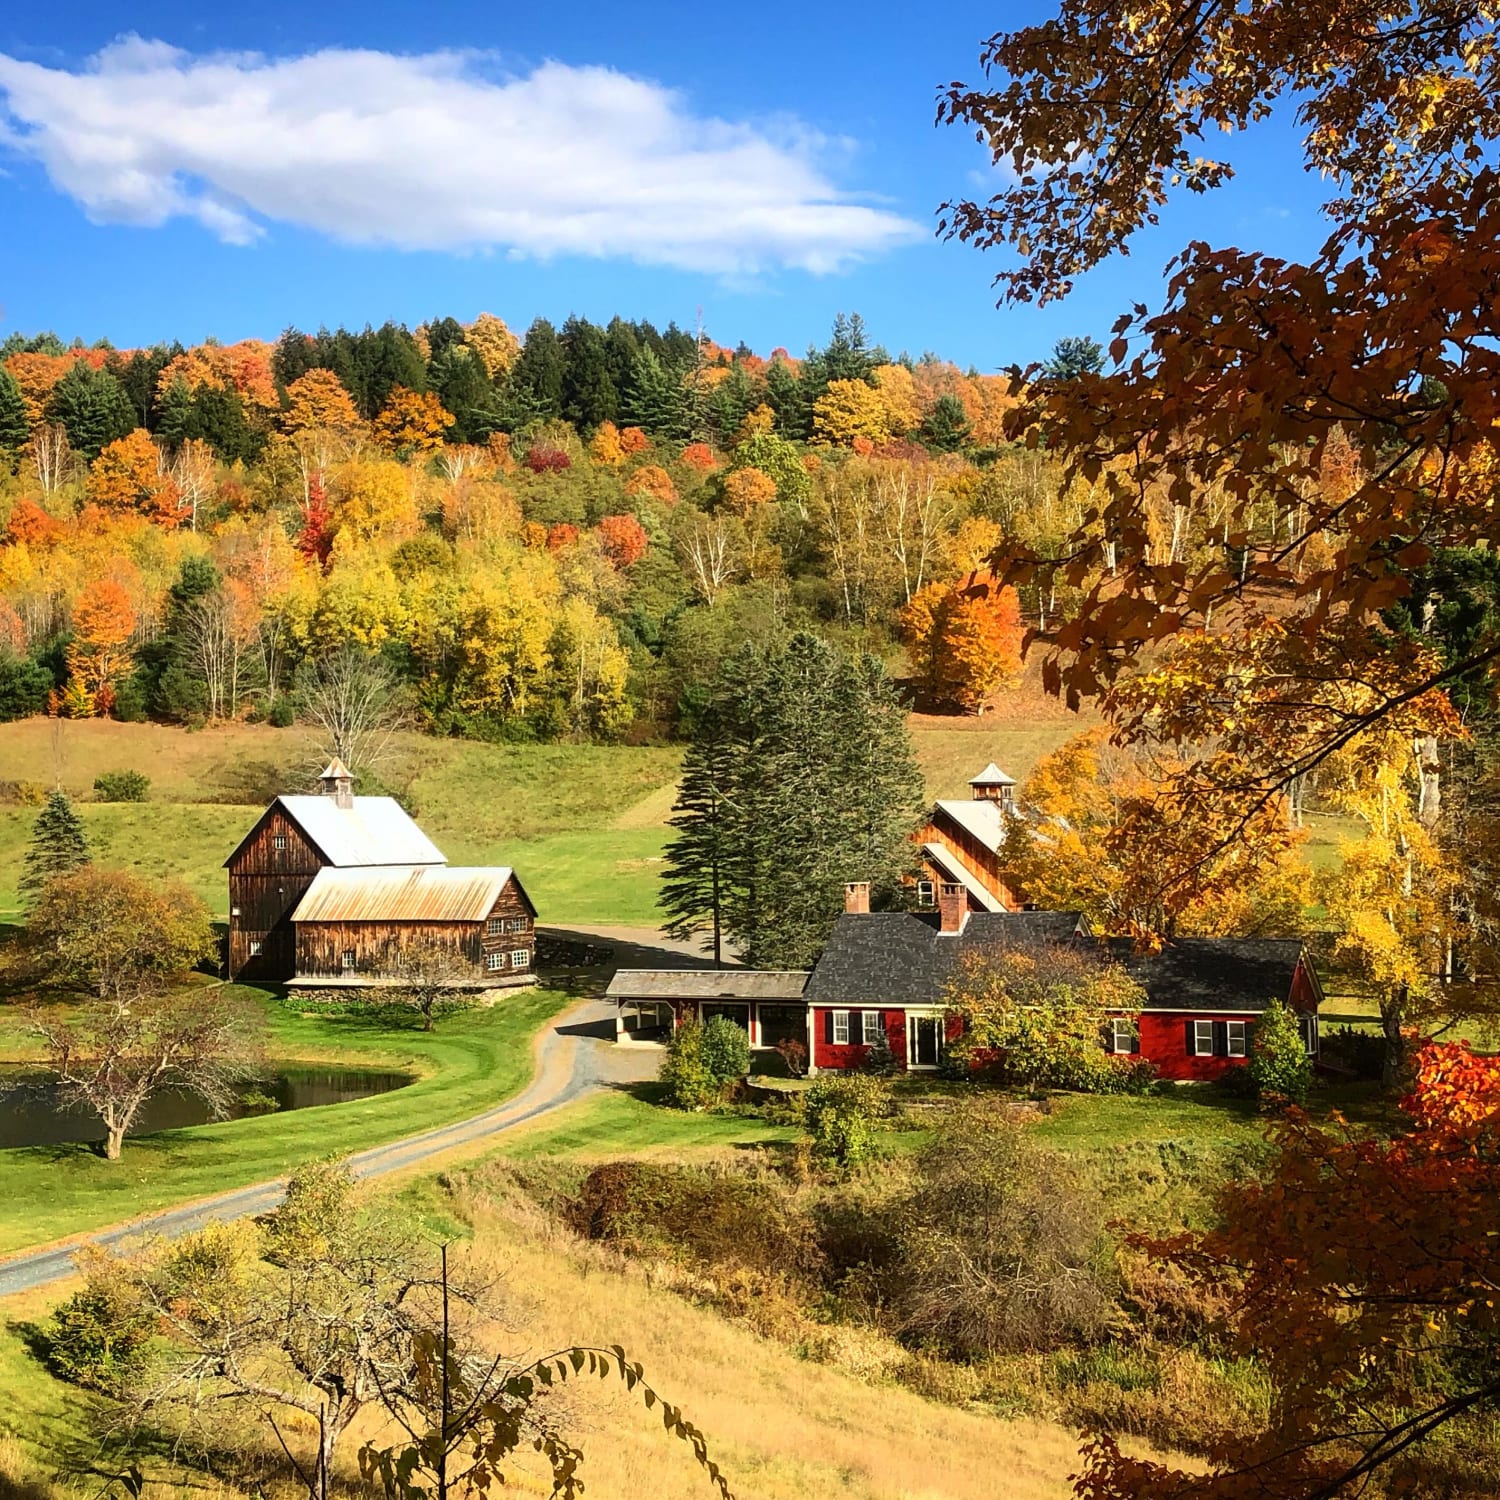 Sleepy Hollow Farm- Pomfret, Vermont (Woodstock) perhaps the most Instagramed spot in New England